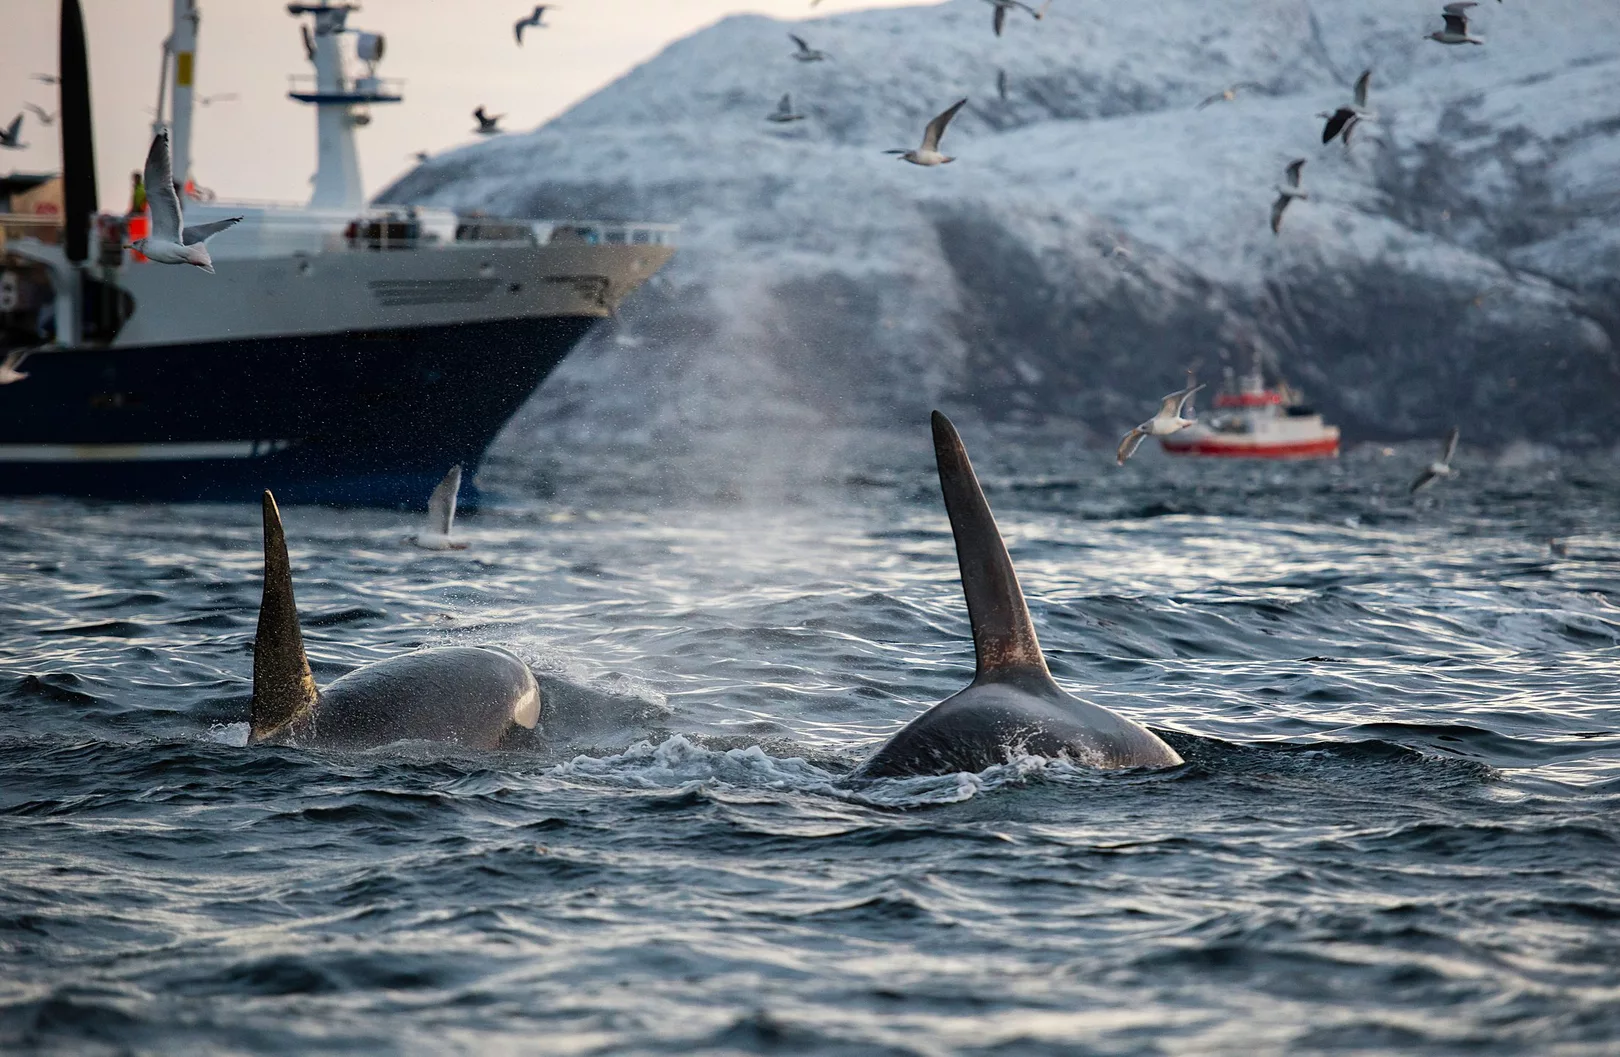 Photo of two whale fins at the sea surface with a boat and snowy mountain view at the background